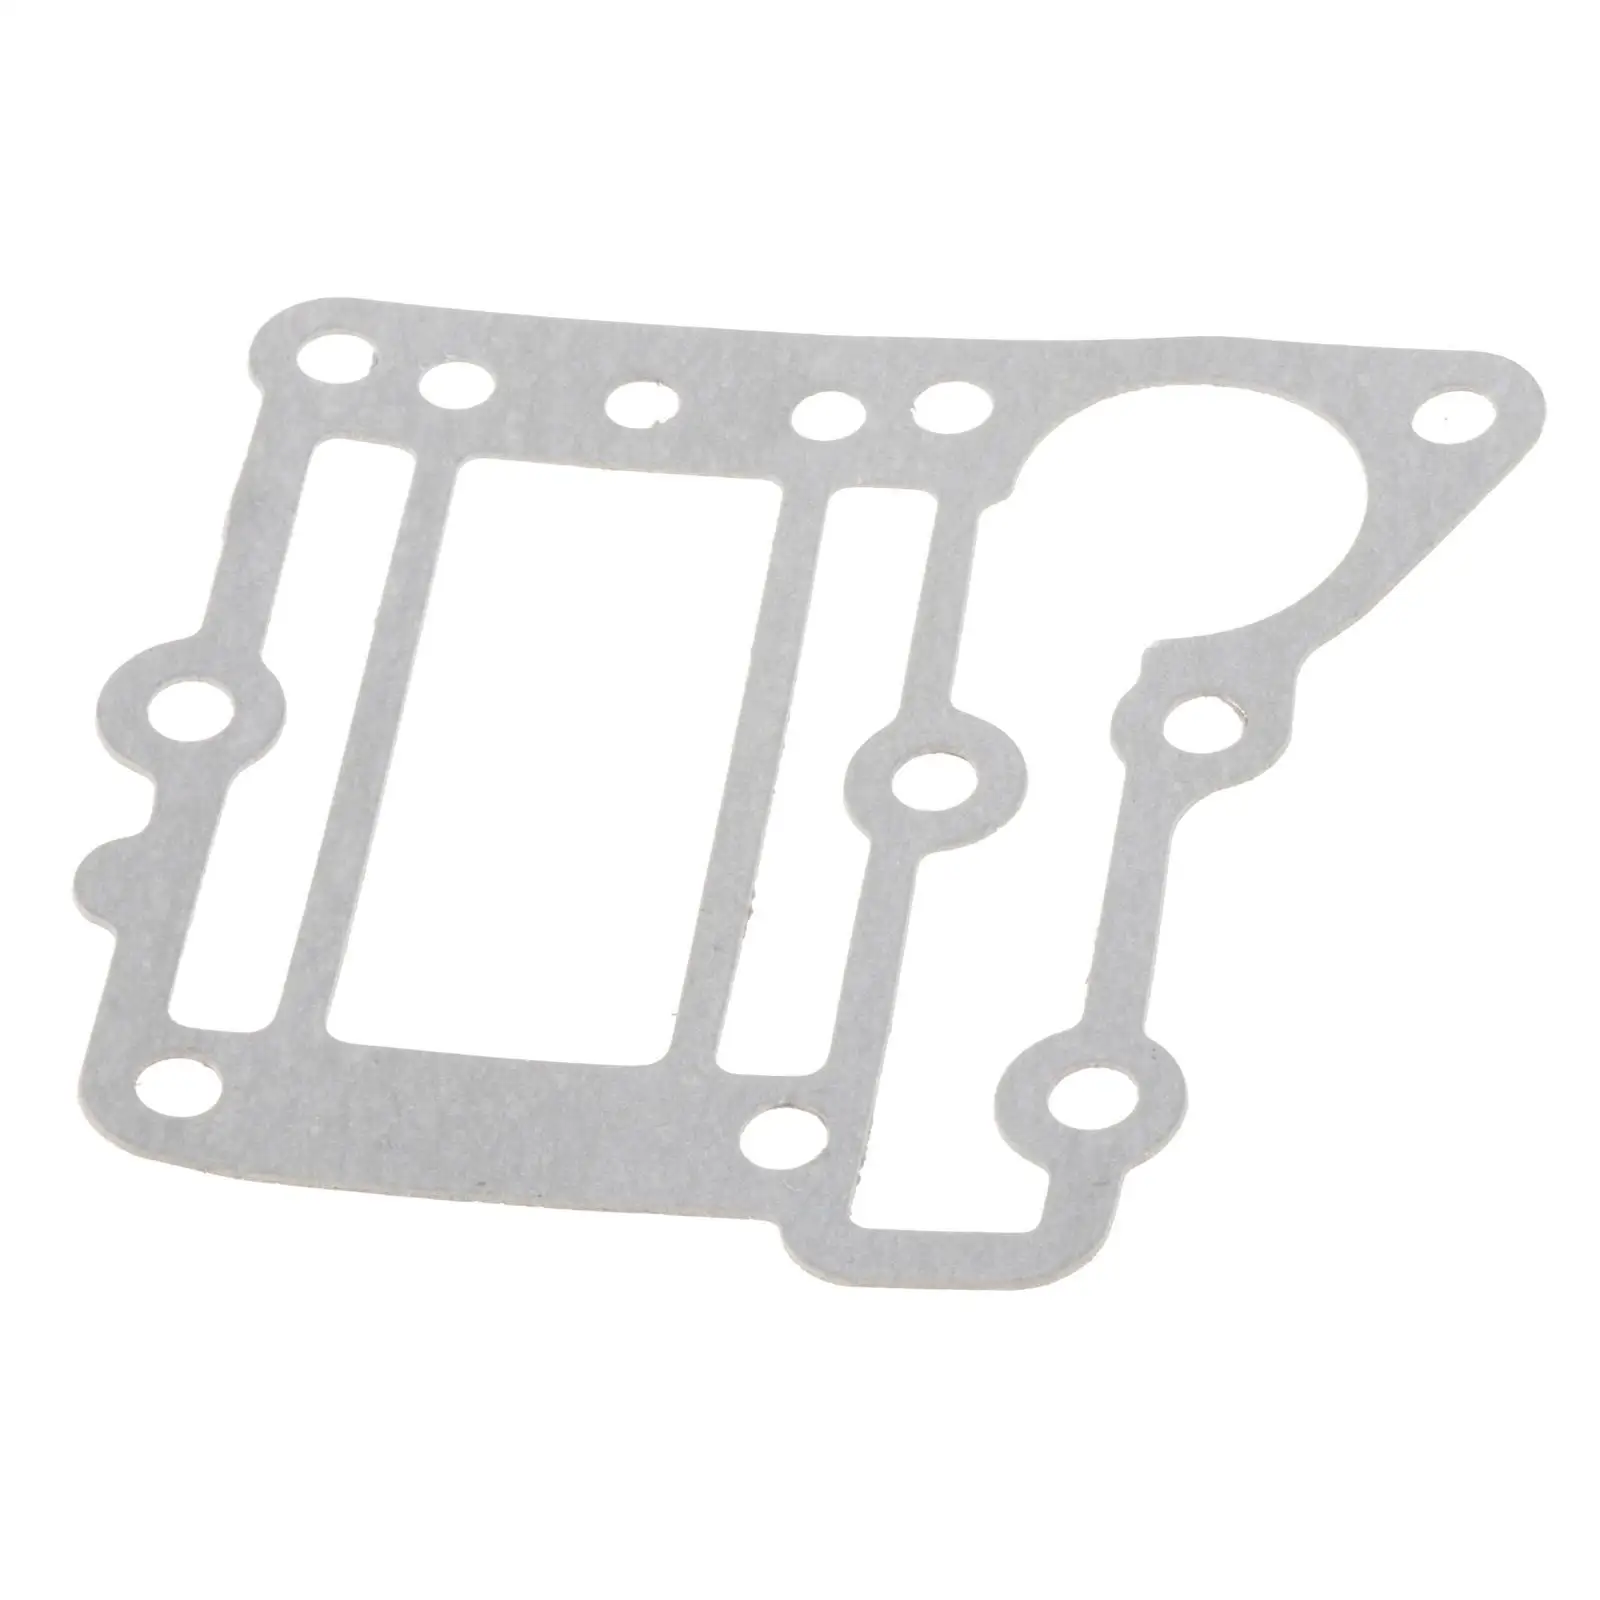 Motorbike Gasket Outer Cover, 6E3-41114-A1 Fit for  5HP Outboard